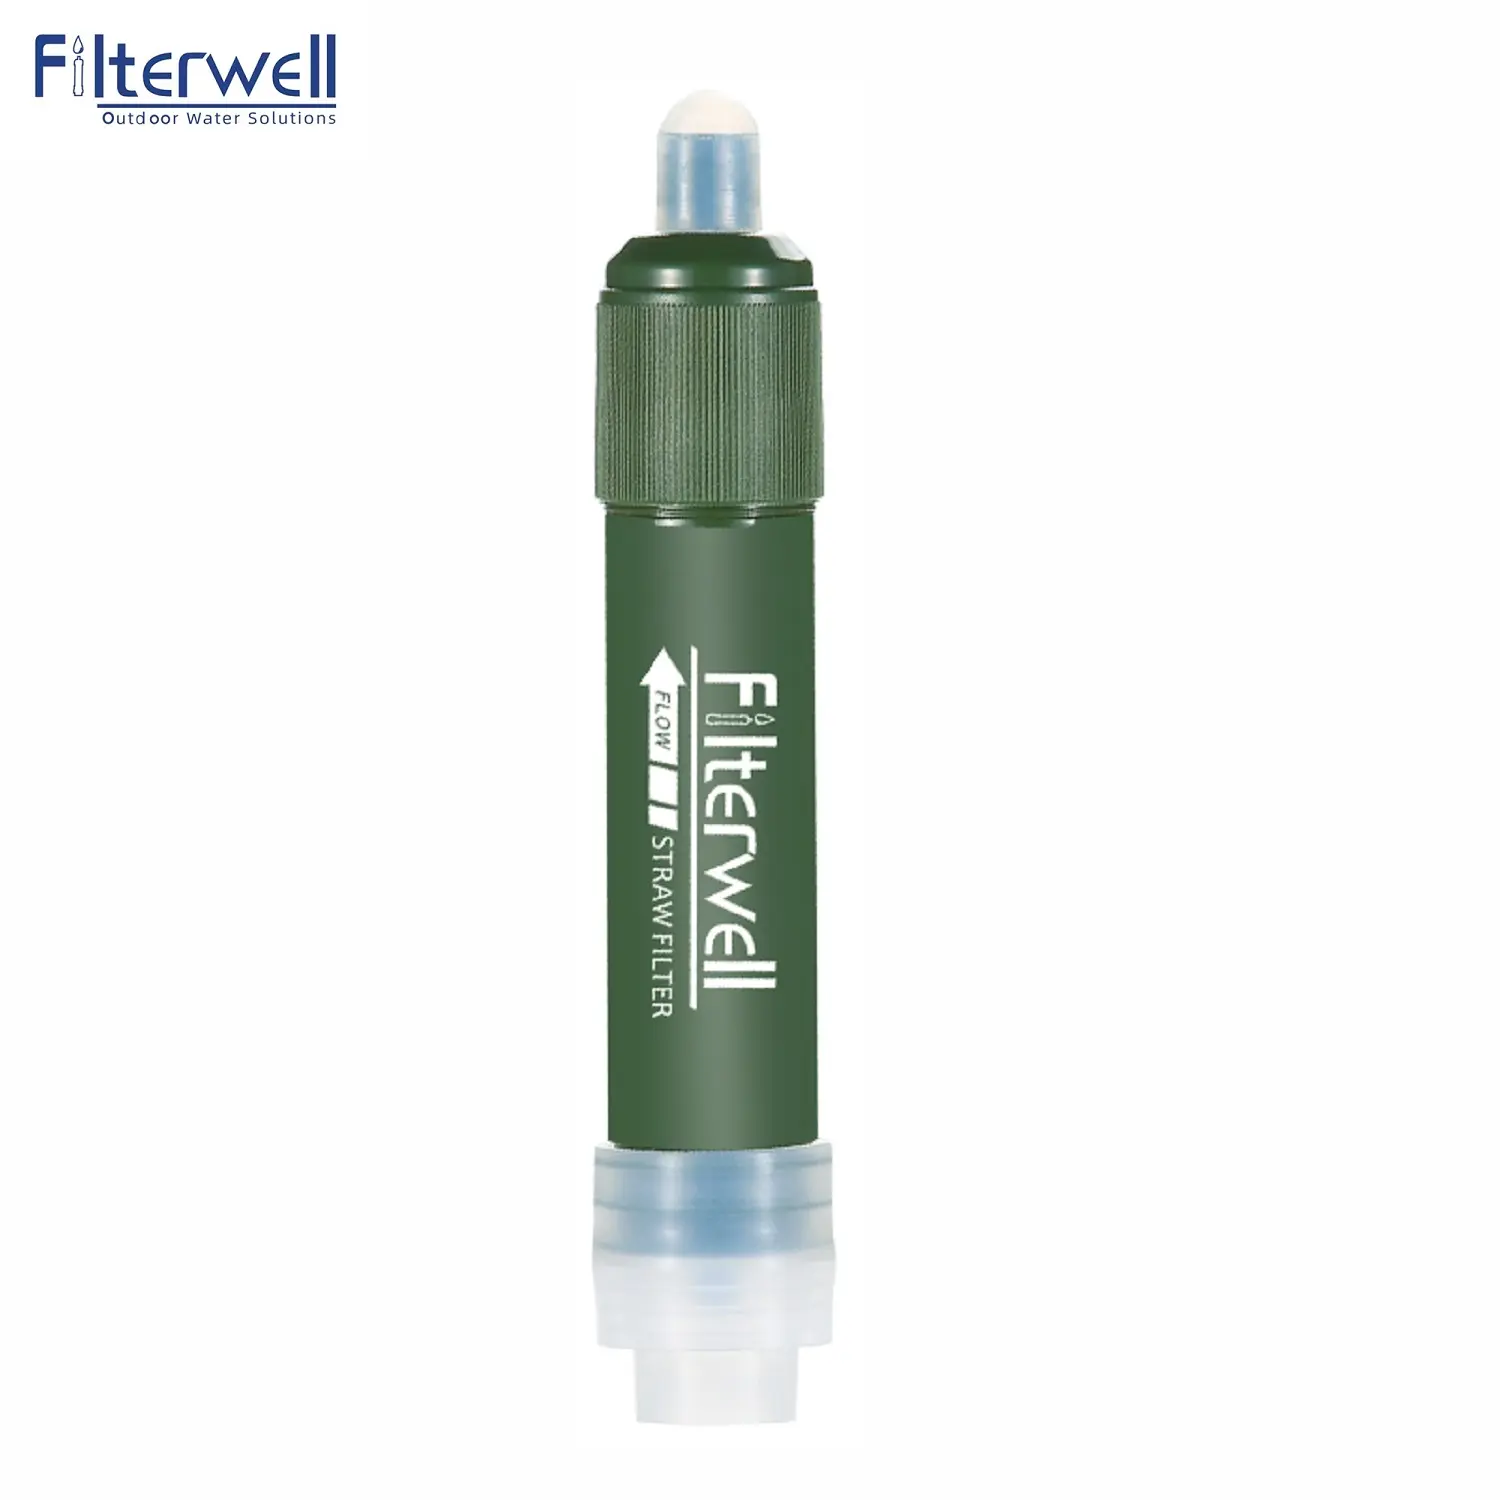 Filterwell Portable camping back pack straw mini portable personal Life water filtration filter straw